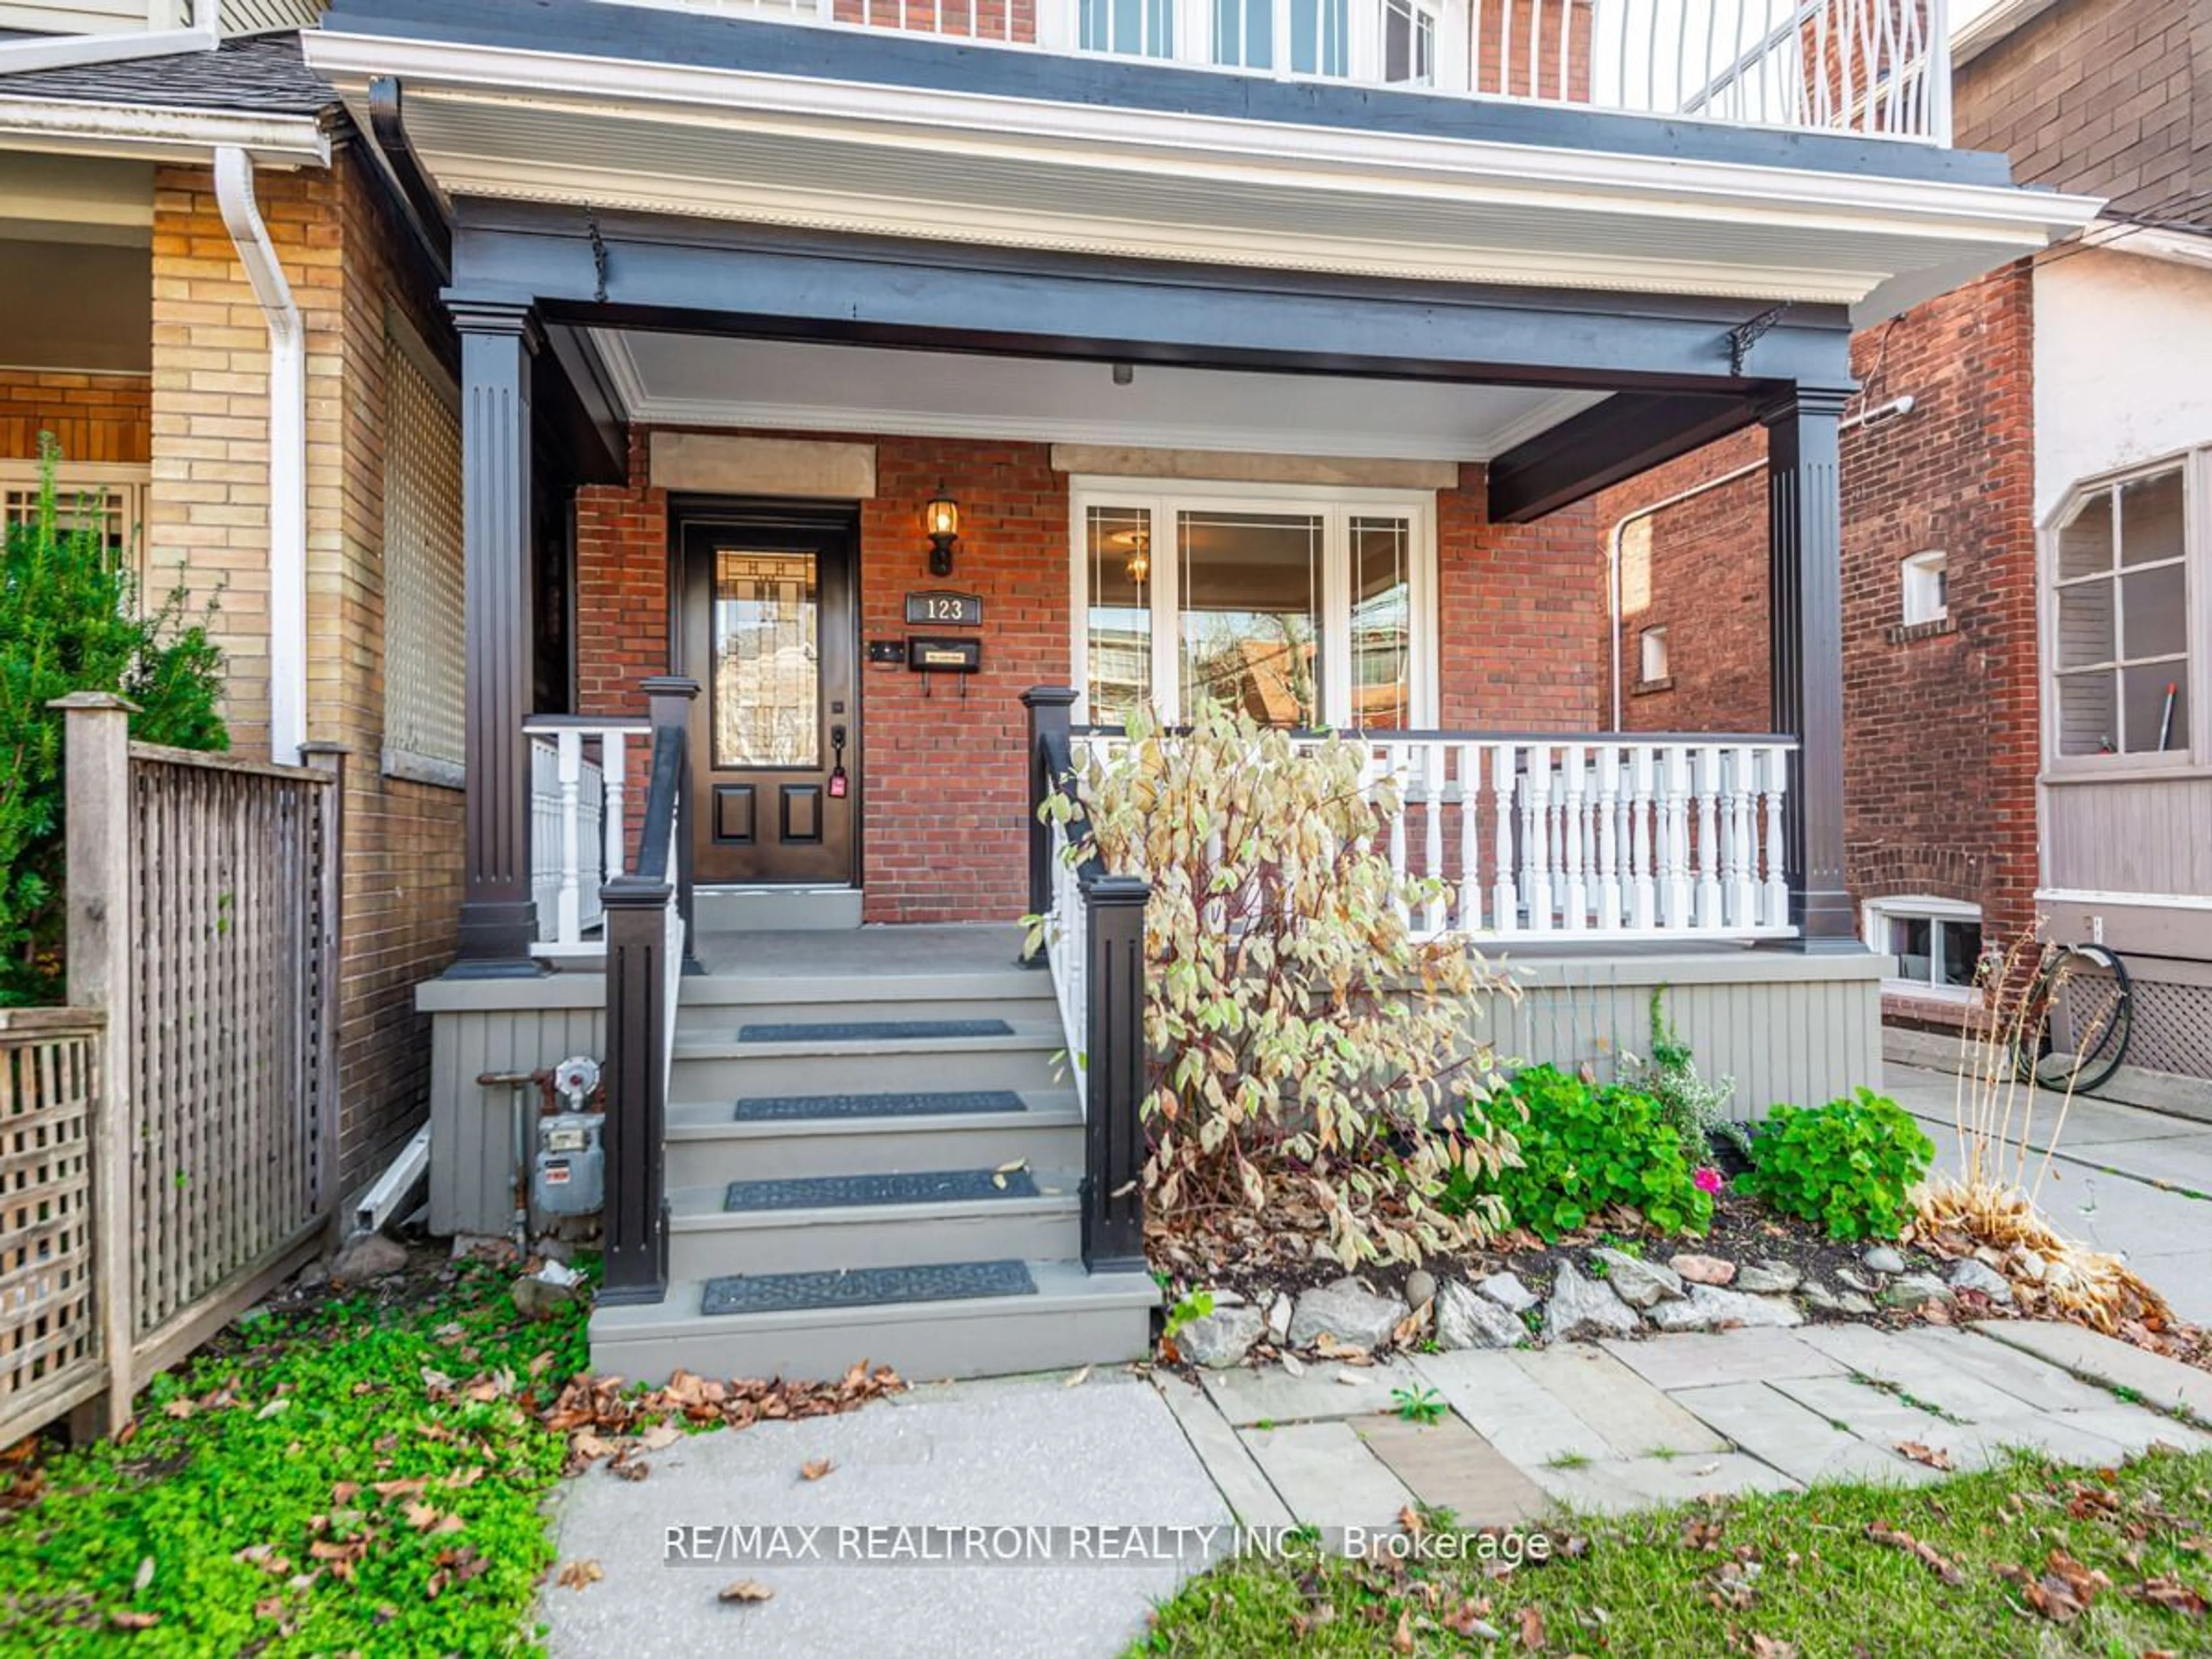 Home with unknown exterior material for 123 Browning Ave, Toronto Ontario M4K 1W4